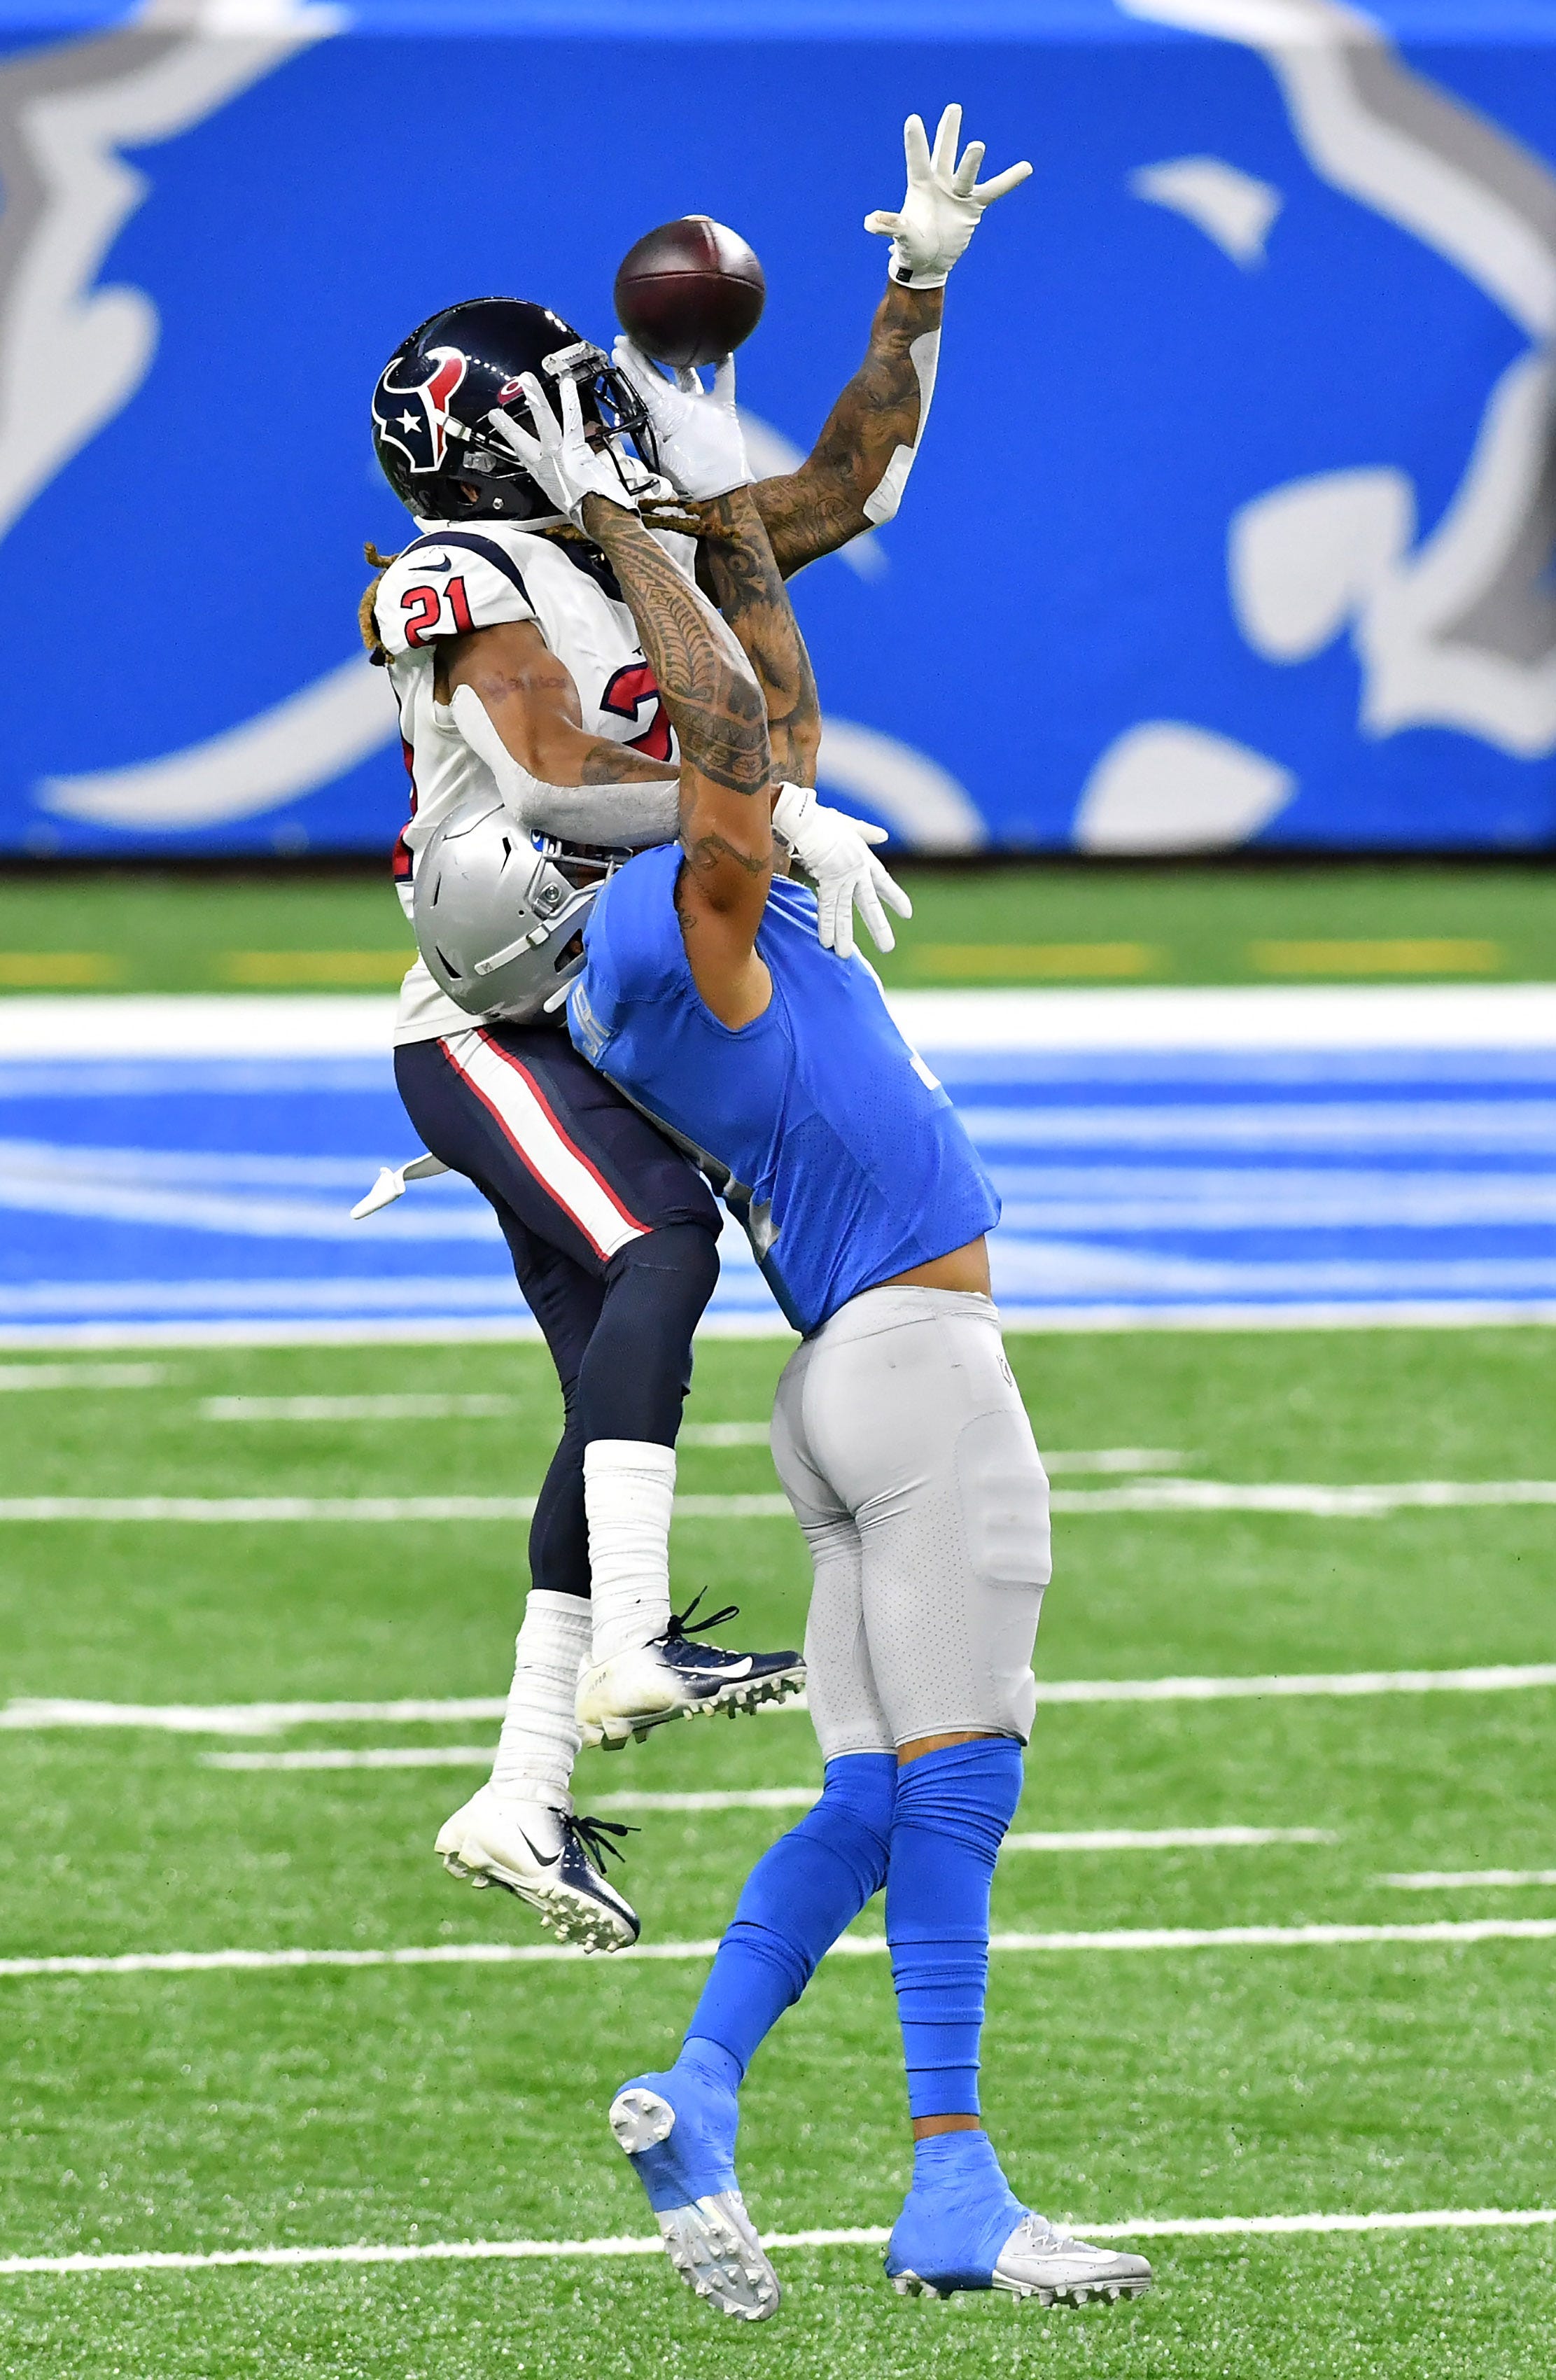 Texans cornerback Bradley Roby (21) breaks up this pass intended for Lions wide receiver Marvin Jones Jr. (11)  in the third quarter.  Detroit Lions vs Houston Texans on Thanksgiving Day at Ford Field in Detroit on Nov. 26, 2020.  Texans win 41-25.